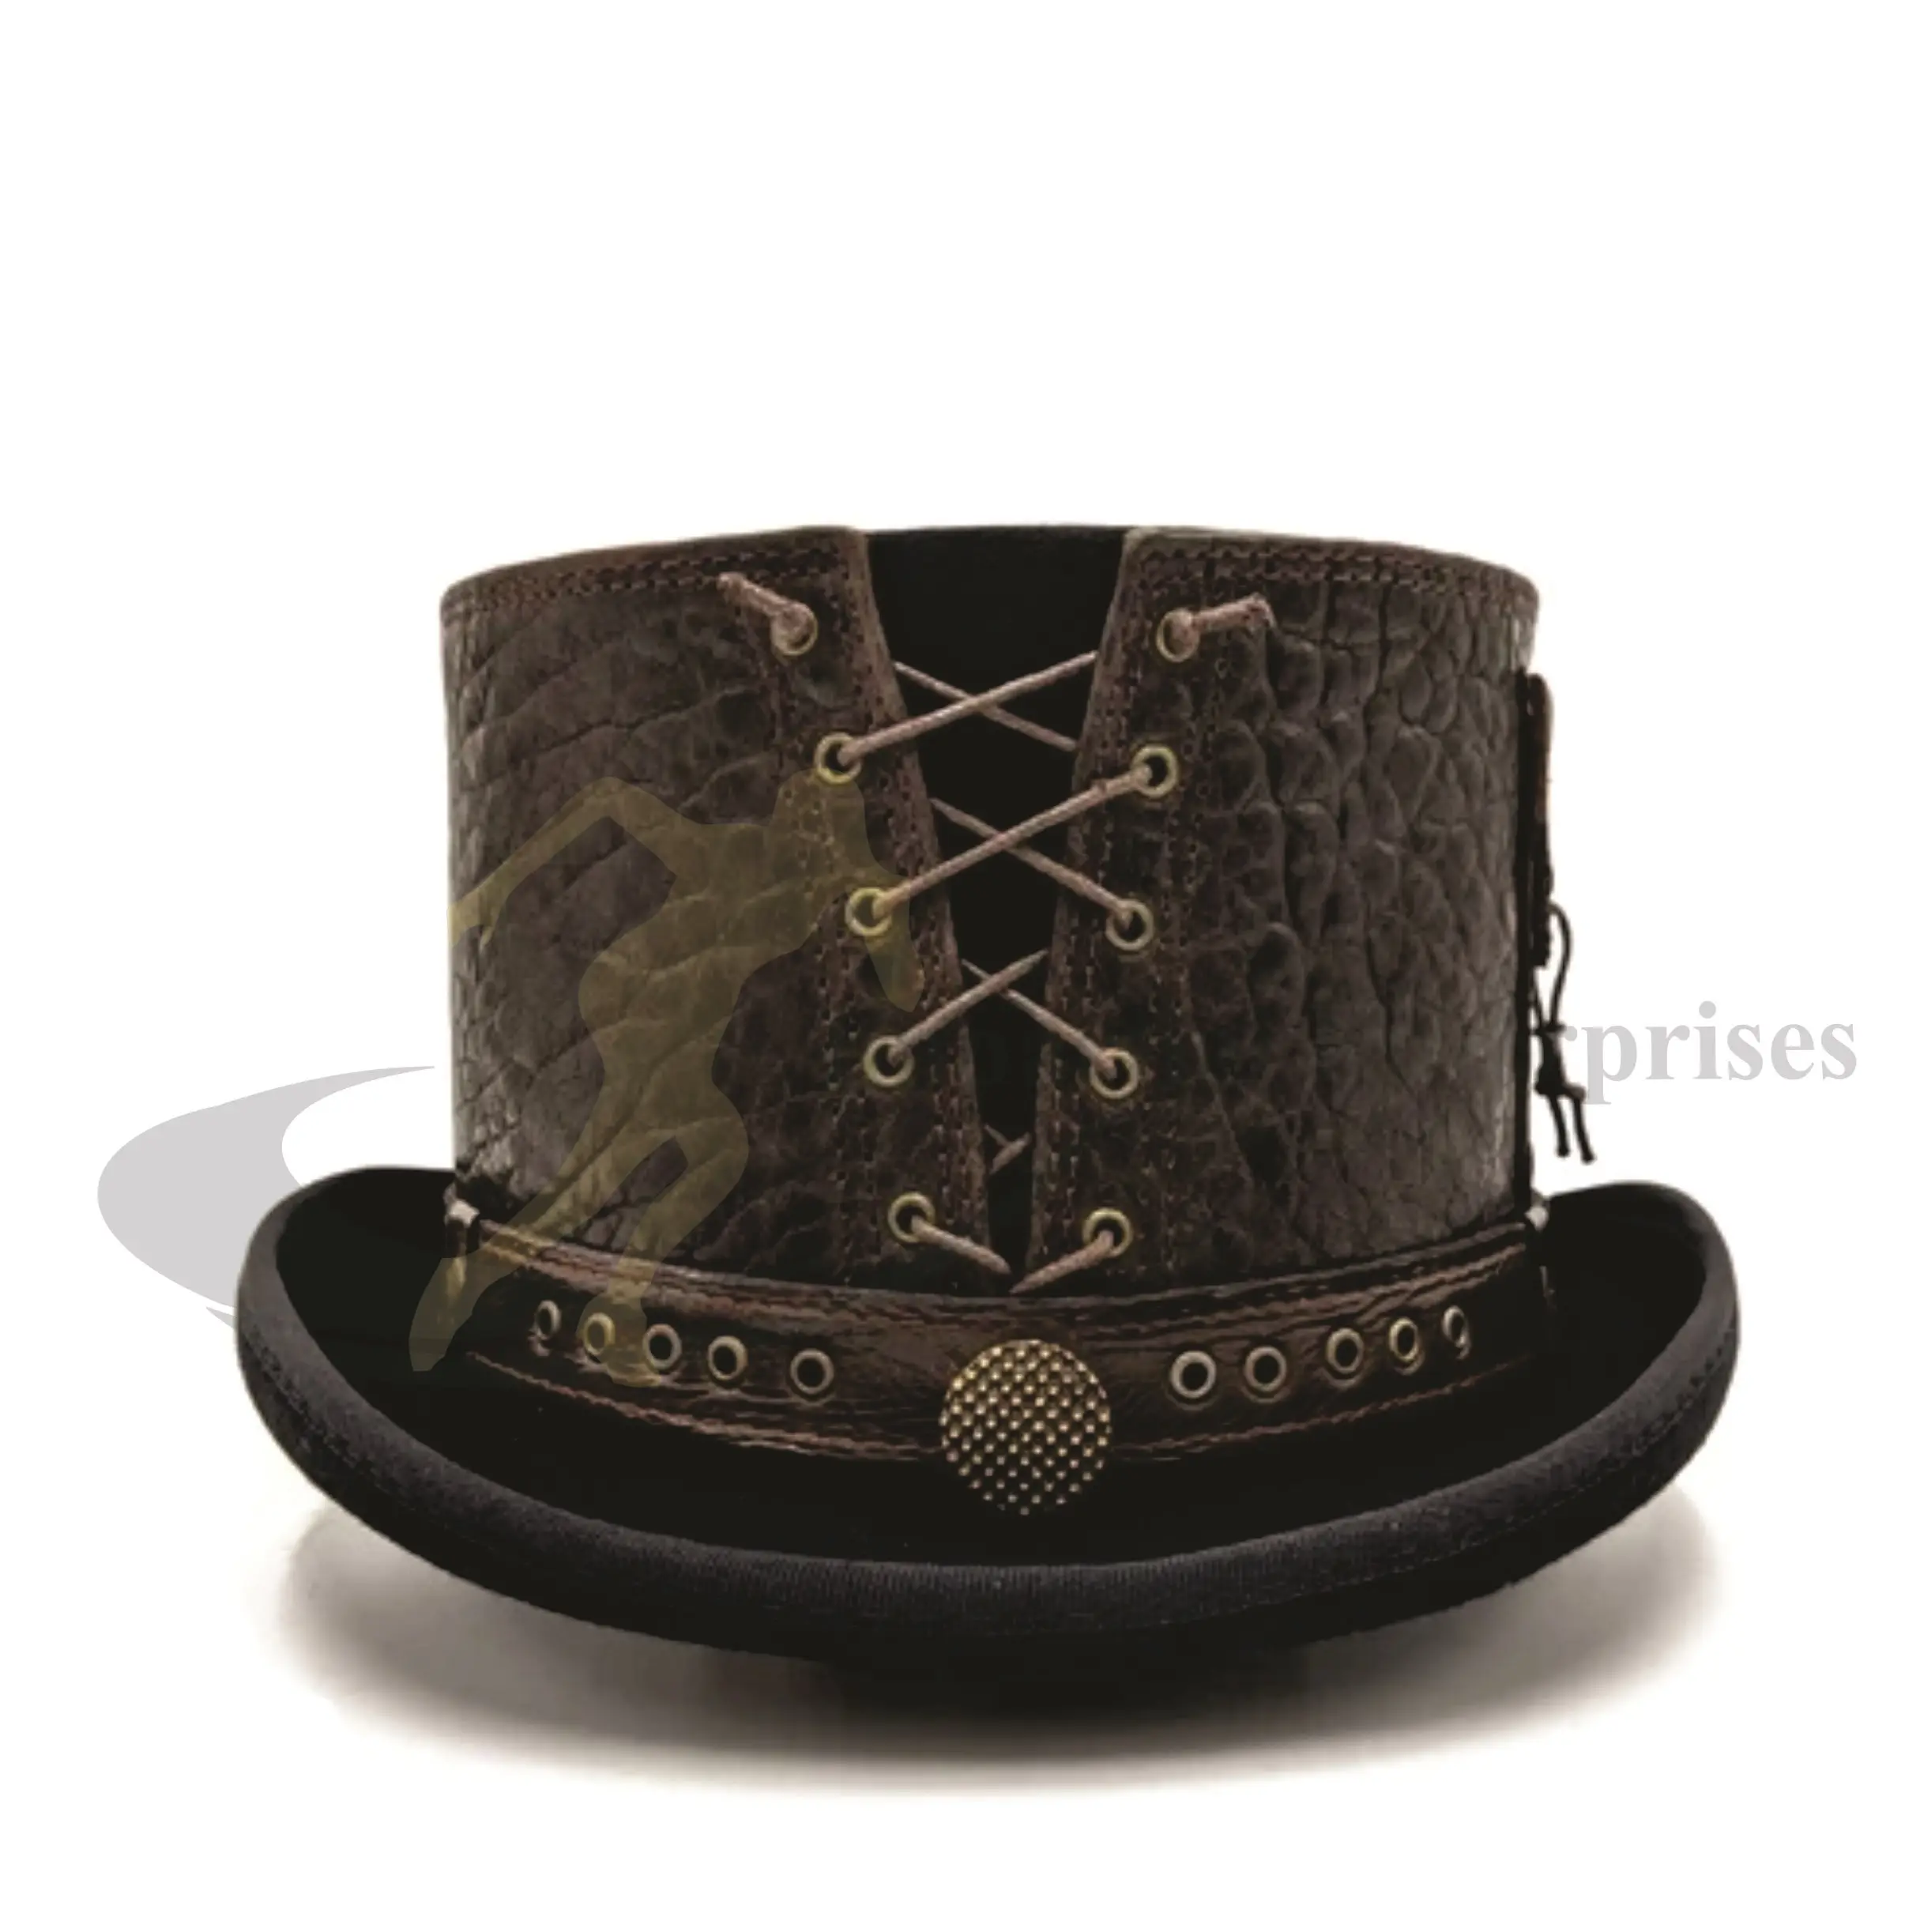 Affordable price top manufacturer personalized outdoor adult Black Wool Felt Steampunk Top Hat Leather Hatband